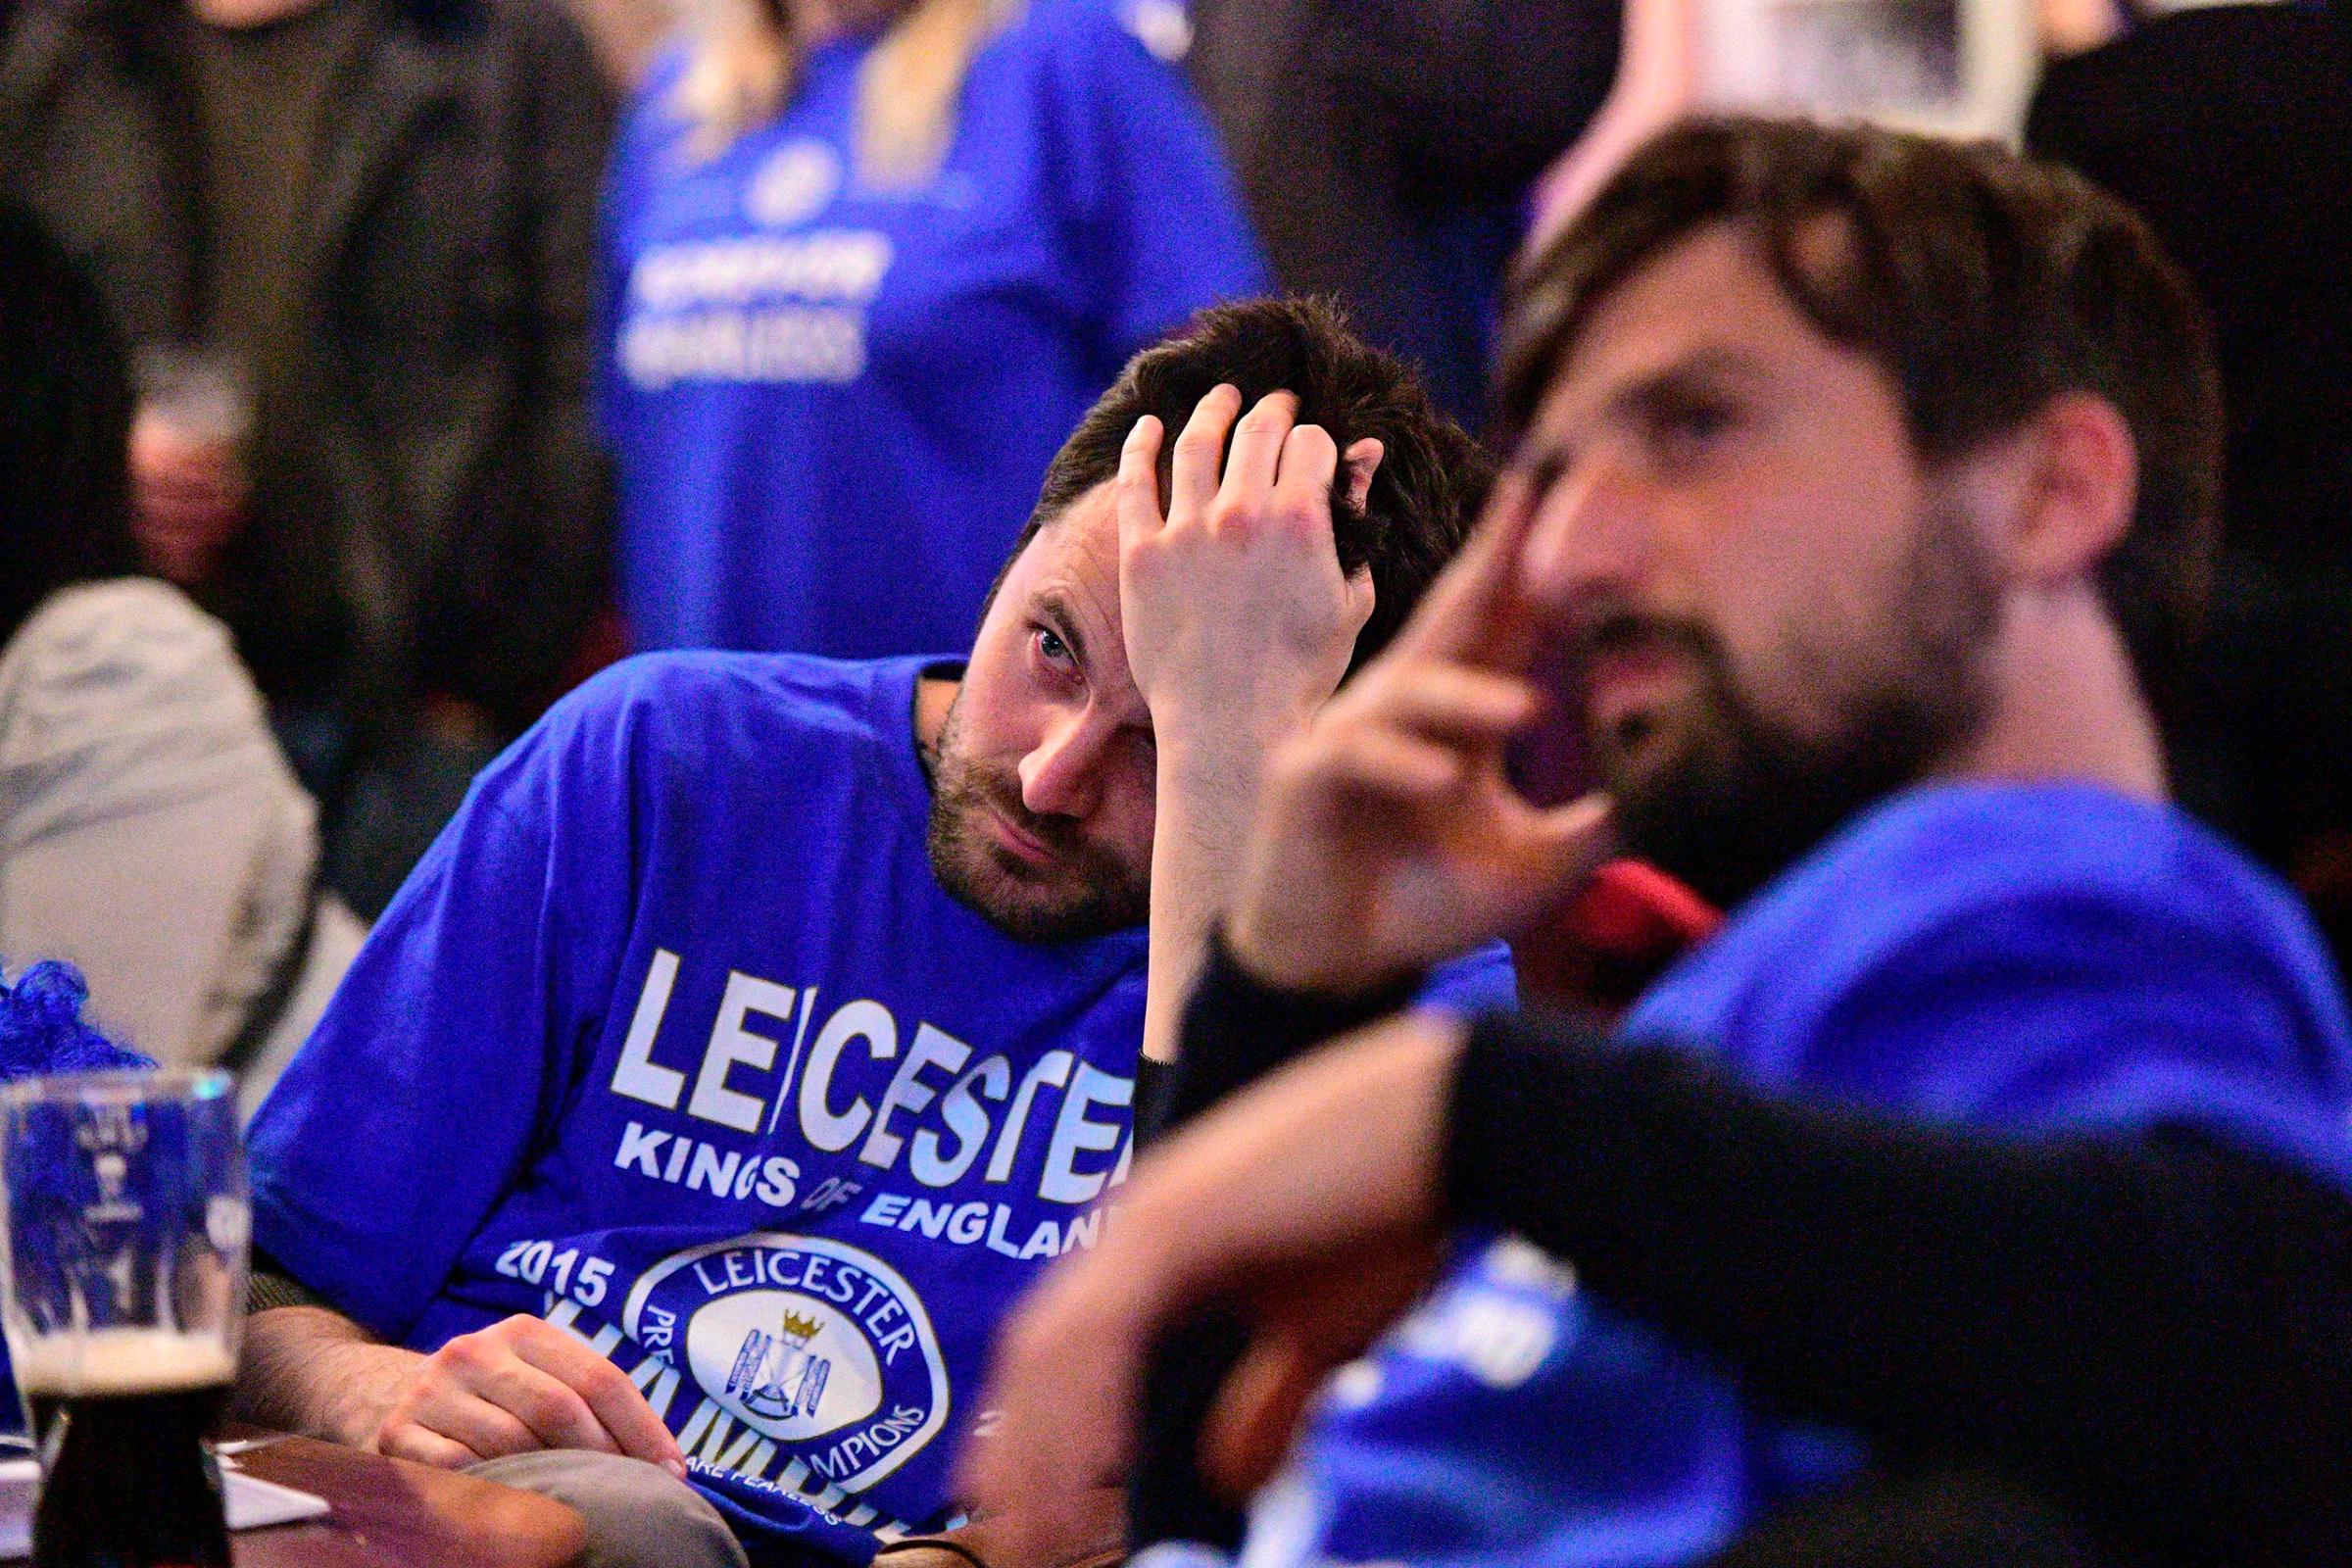 A Leicester City fan reacts as he watches after Tottenham scored their second goal in the English Premier League football match between Chelsea and Tottenham Hotspur in a pub in central Leicester, eastern England, on May 2, 2016.